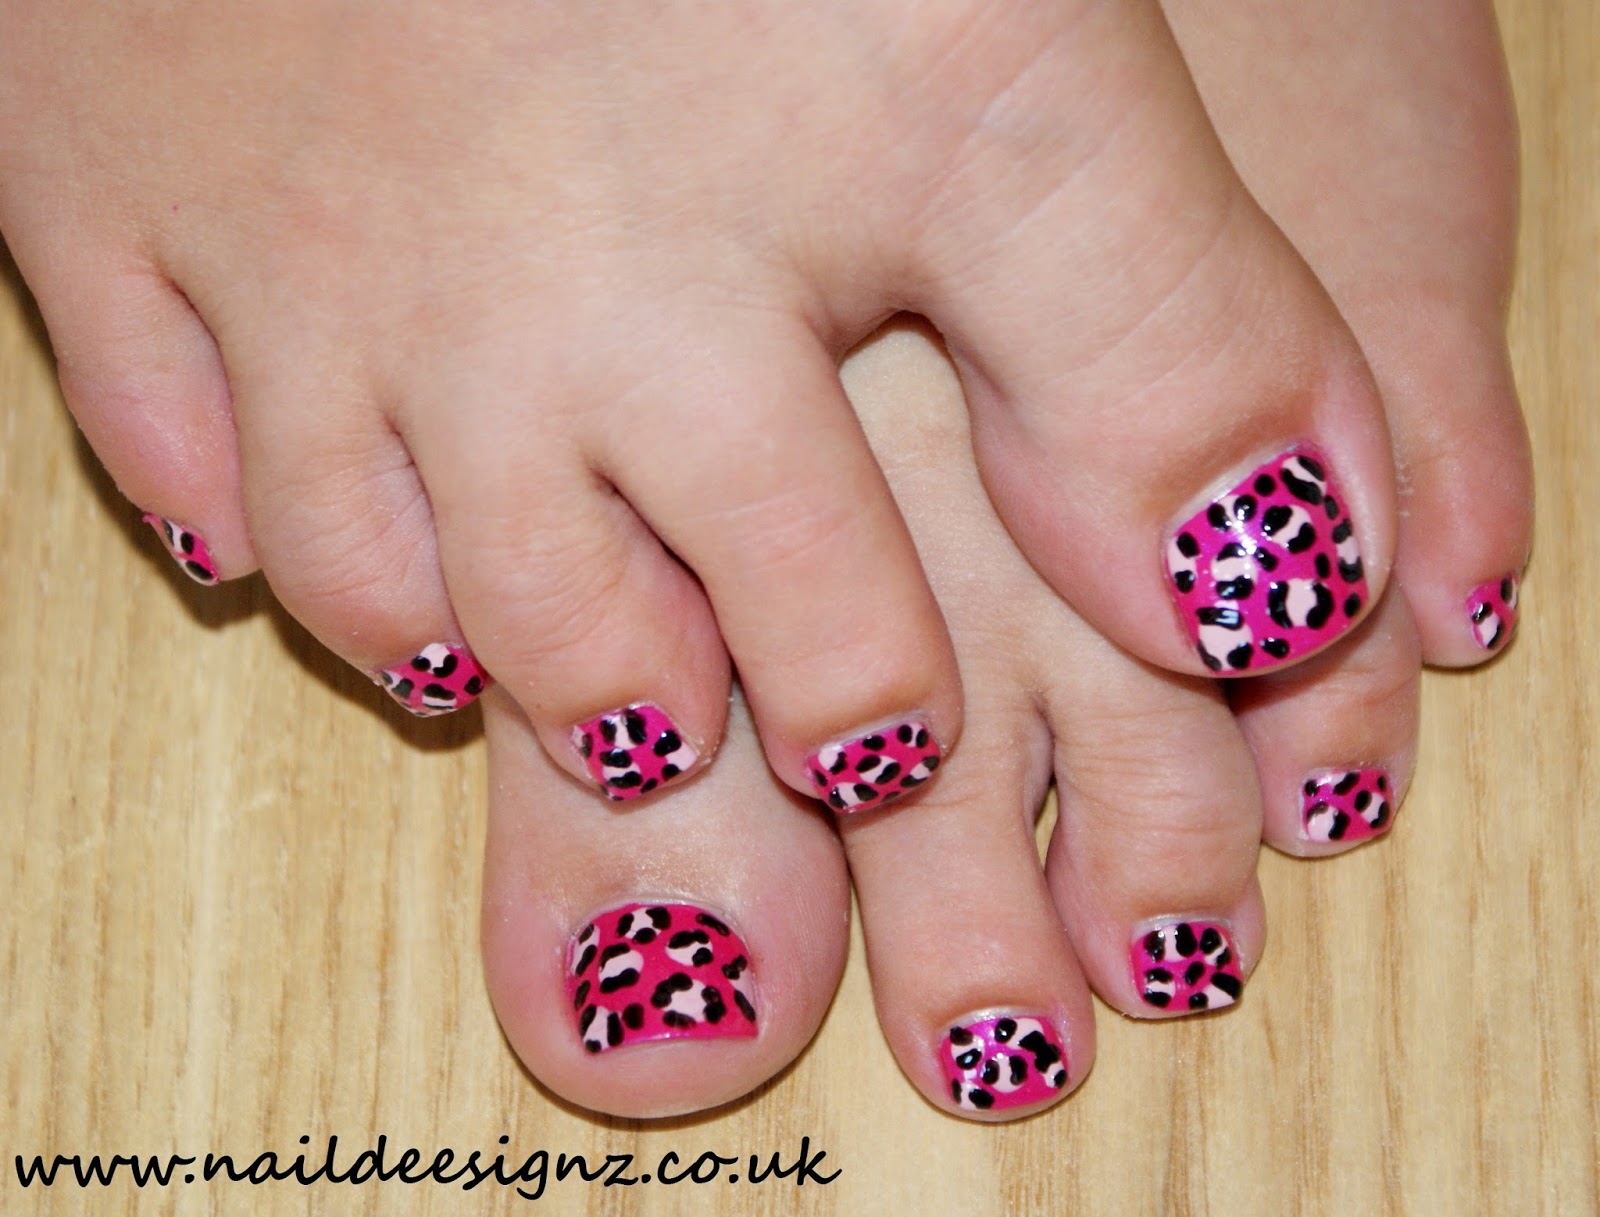 15 Pink Leopard Nail Designs Images Pink Leopard Print Nails Zebra And Leopard Nail Design And Pink Leopard Print Nail Design Newdesignfile Com,Best Certificate Design Templates Free Download